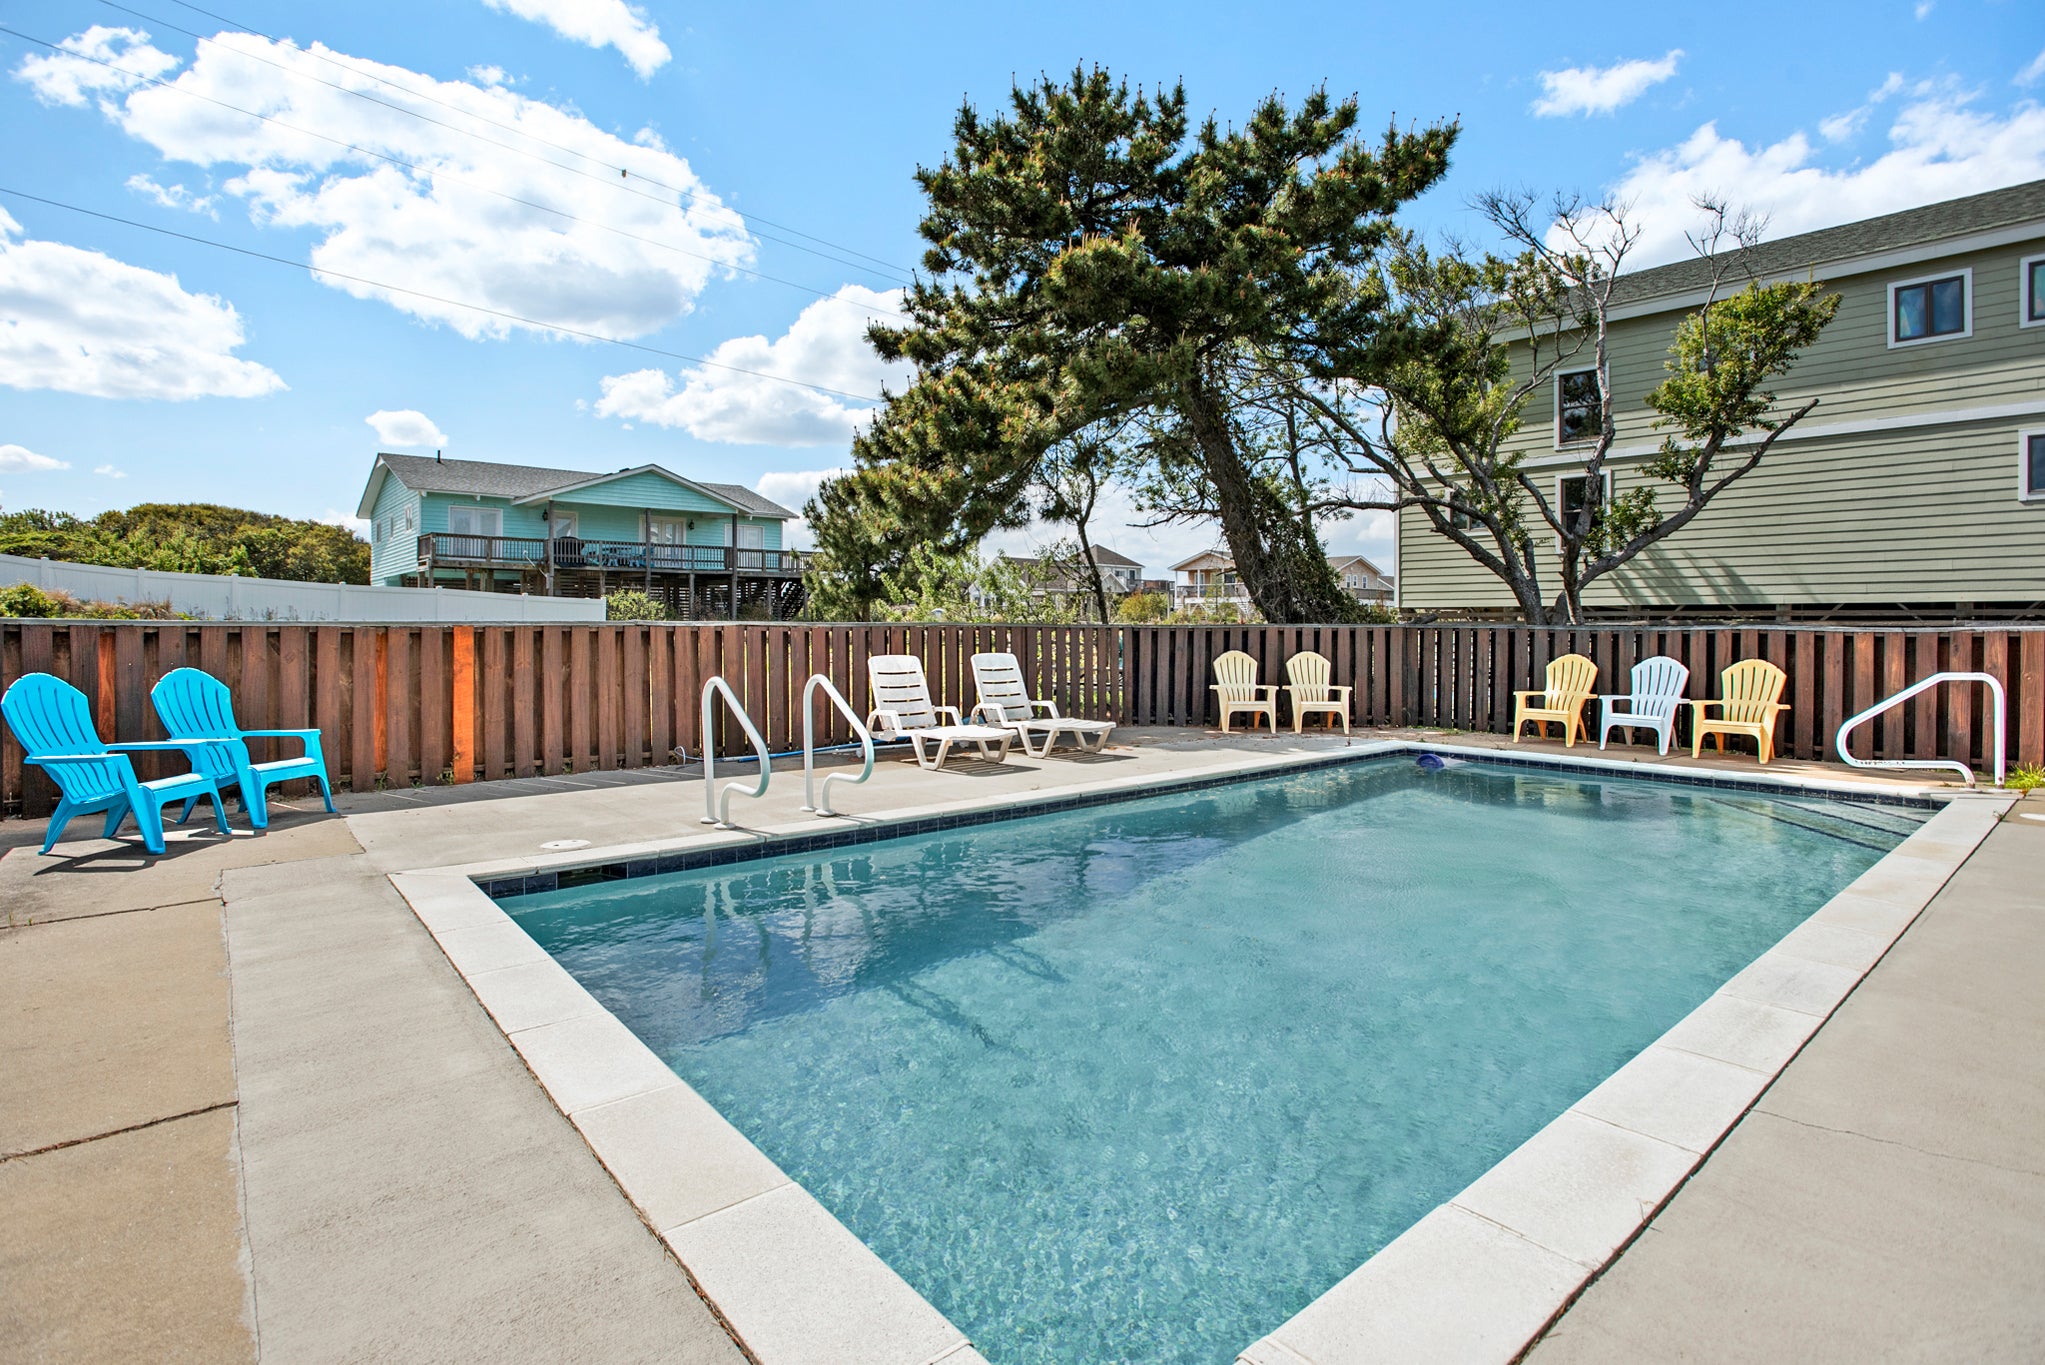 DU702: C And Sky | Private Pool Area